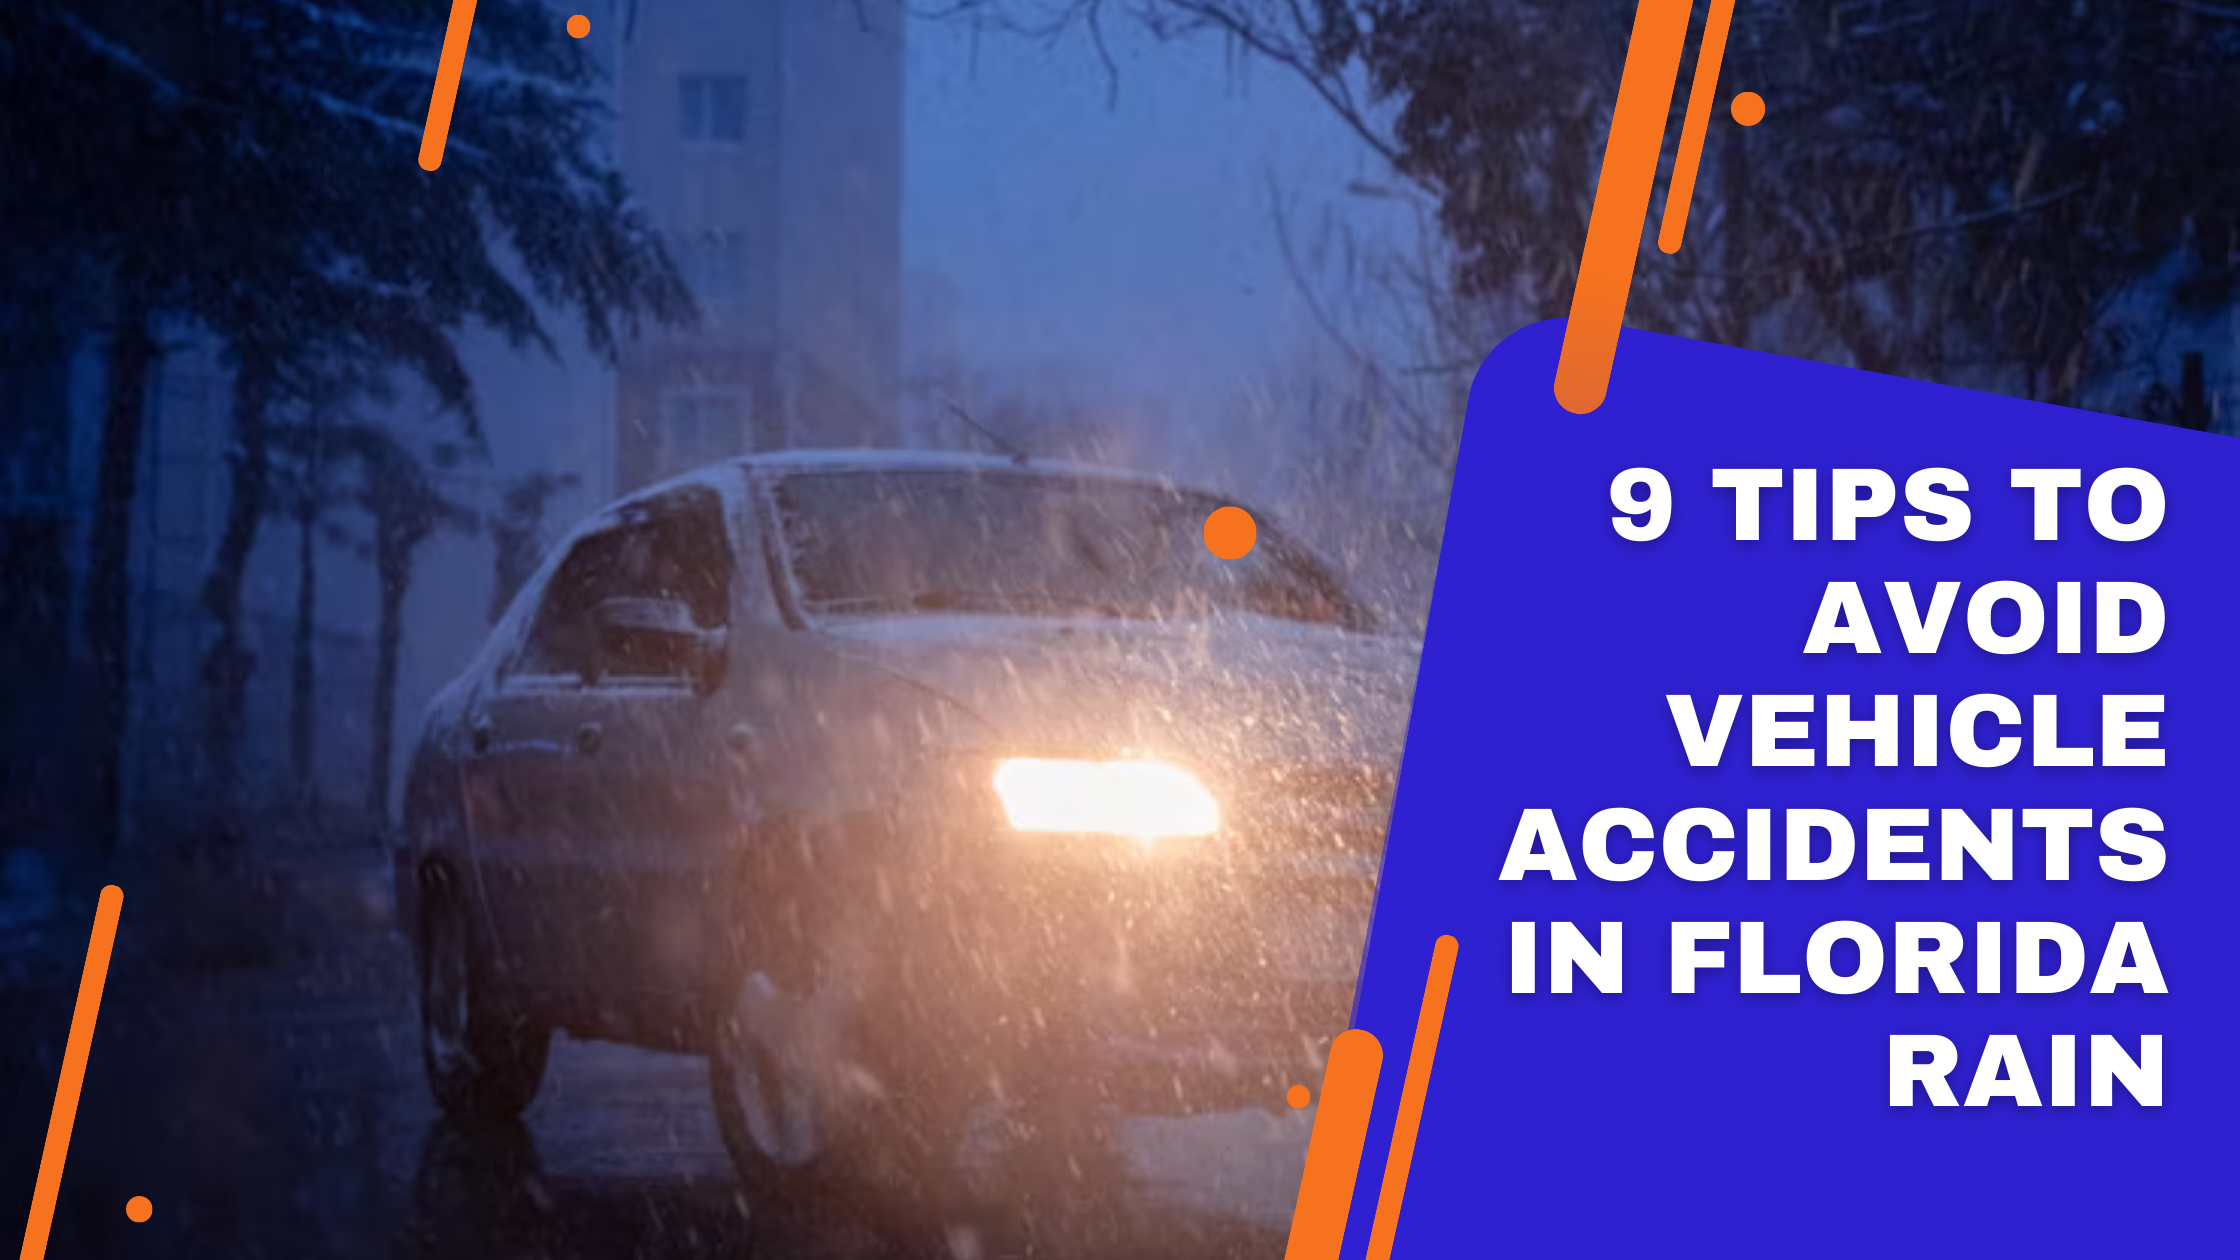 9 Tips to Avoid Vehicle Accidents in Florida Rain